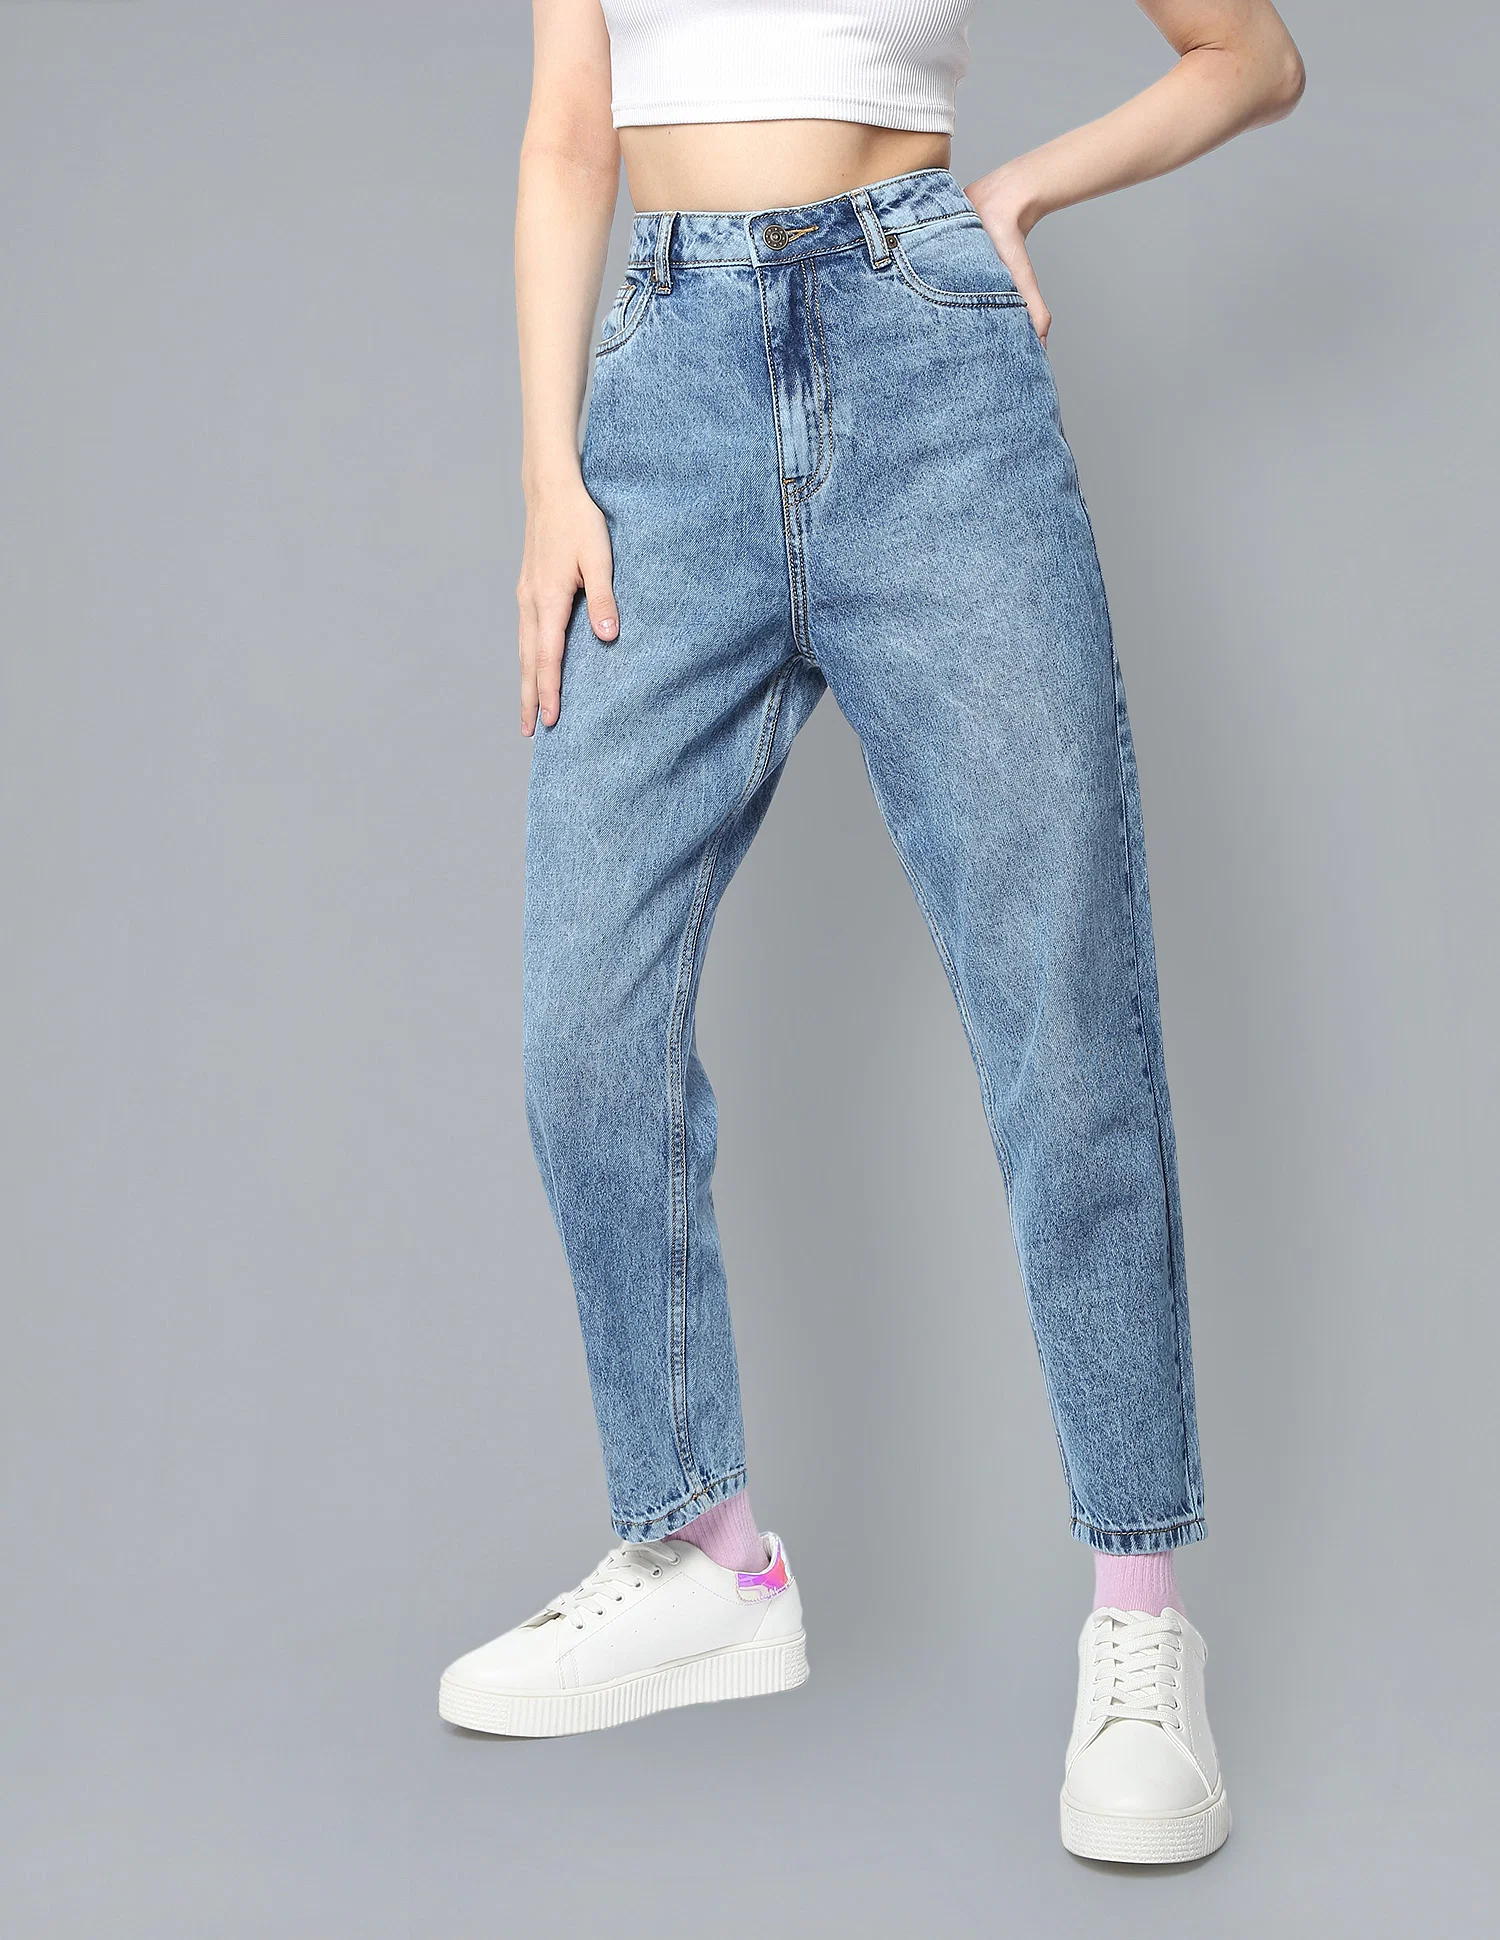 Mom jeans for women – The perfect choice for women插图4